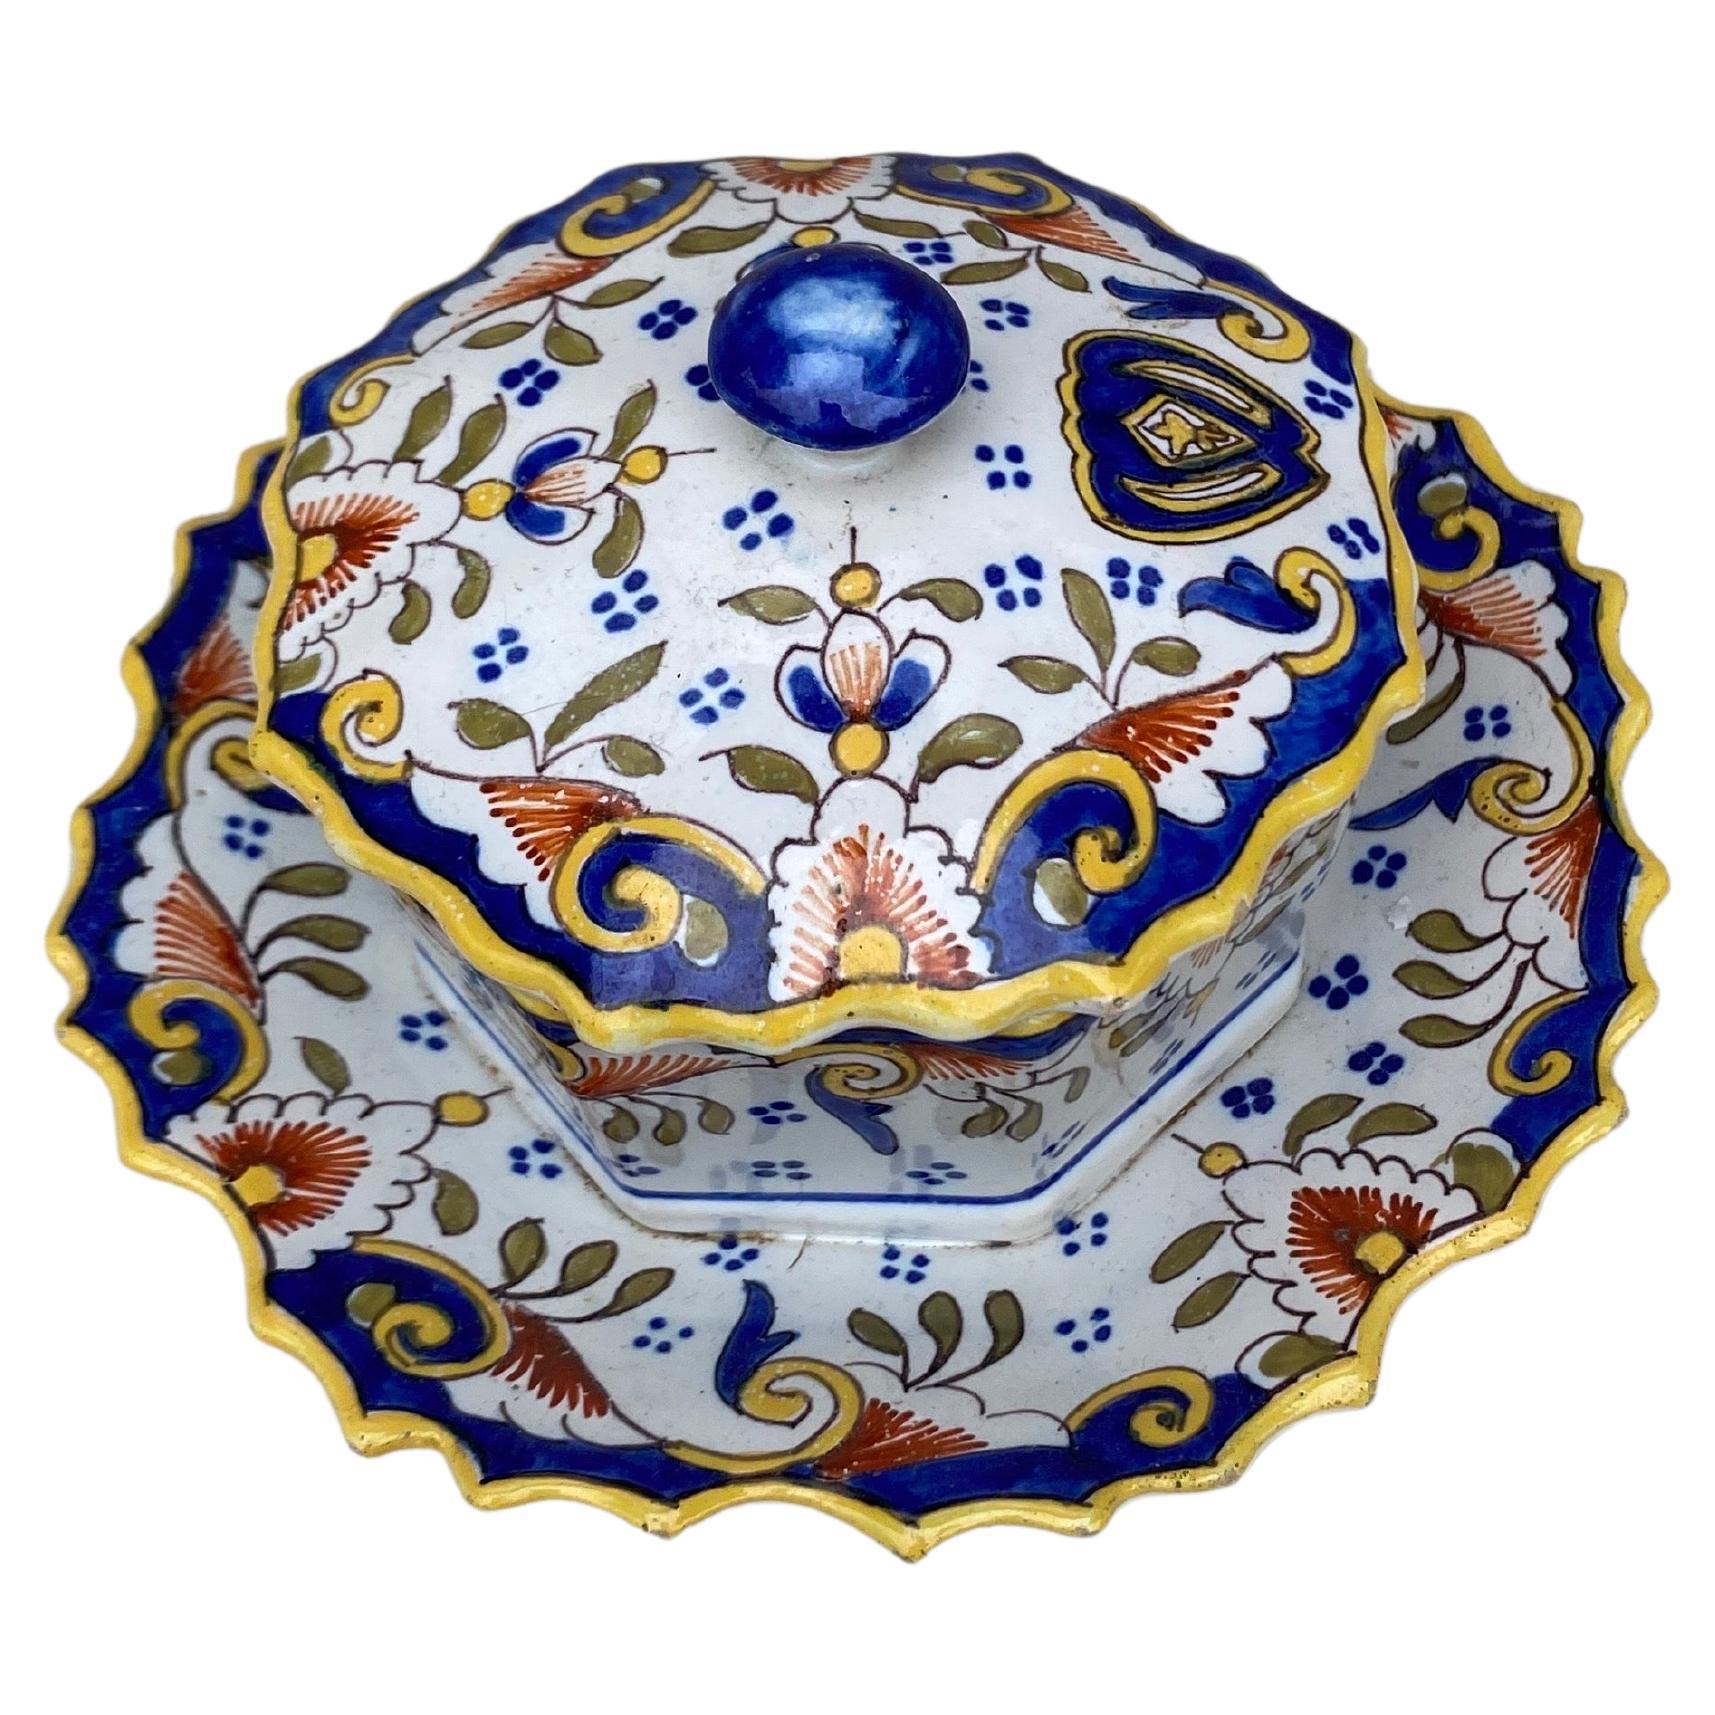 French Faience Tureen attributed to Desvres Circa 1900.
Inspired by Rouen maunufacture.
Signed St Gilles Croix de vie.